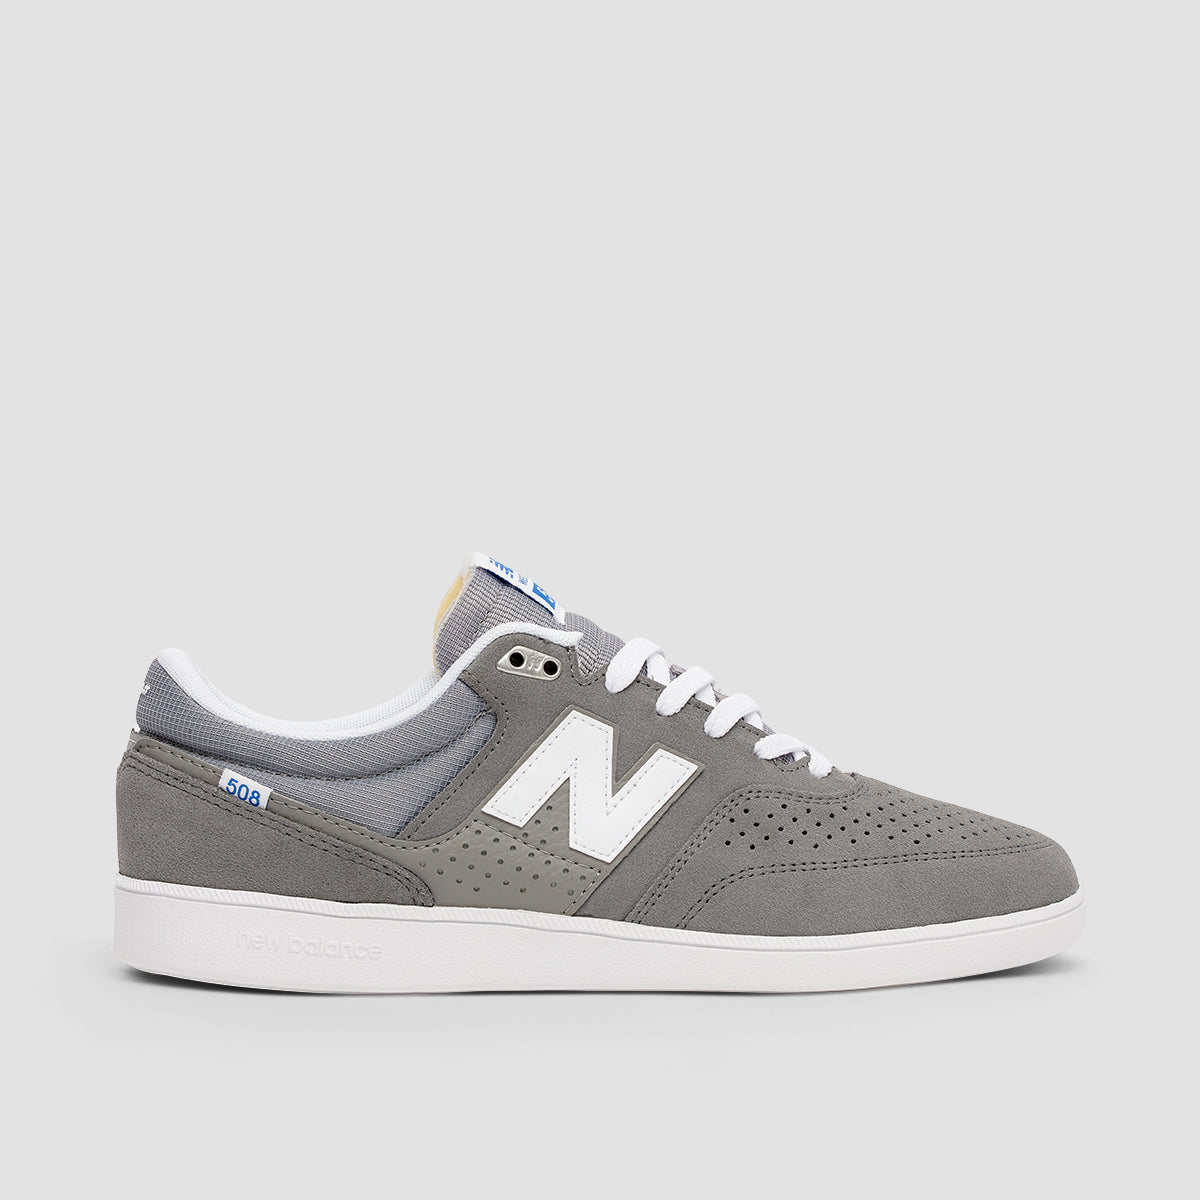 New Balance Westgate 508 Grey/White – Rollersnakes